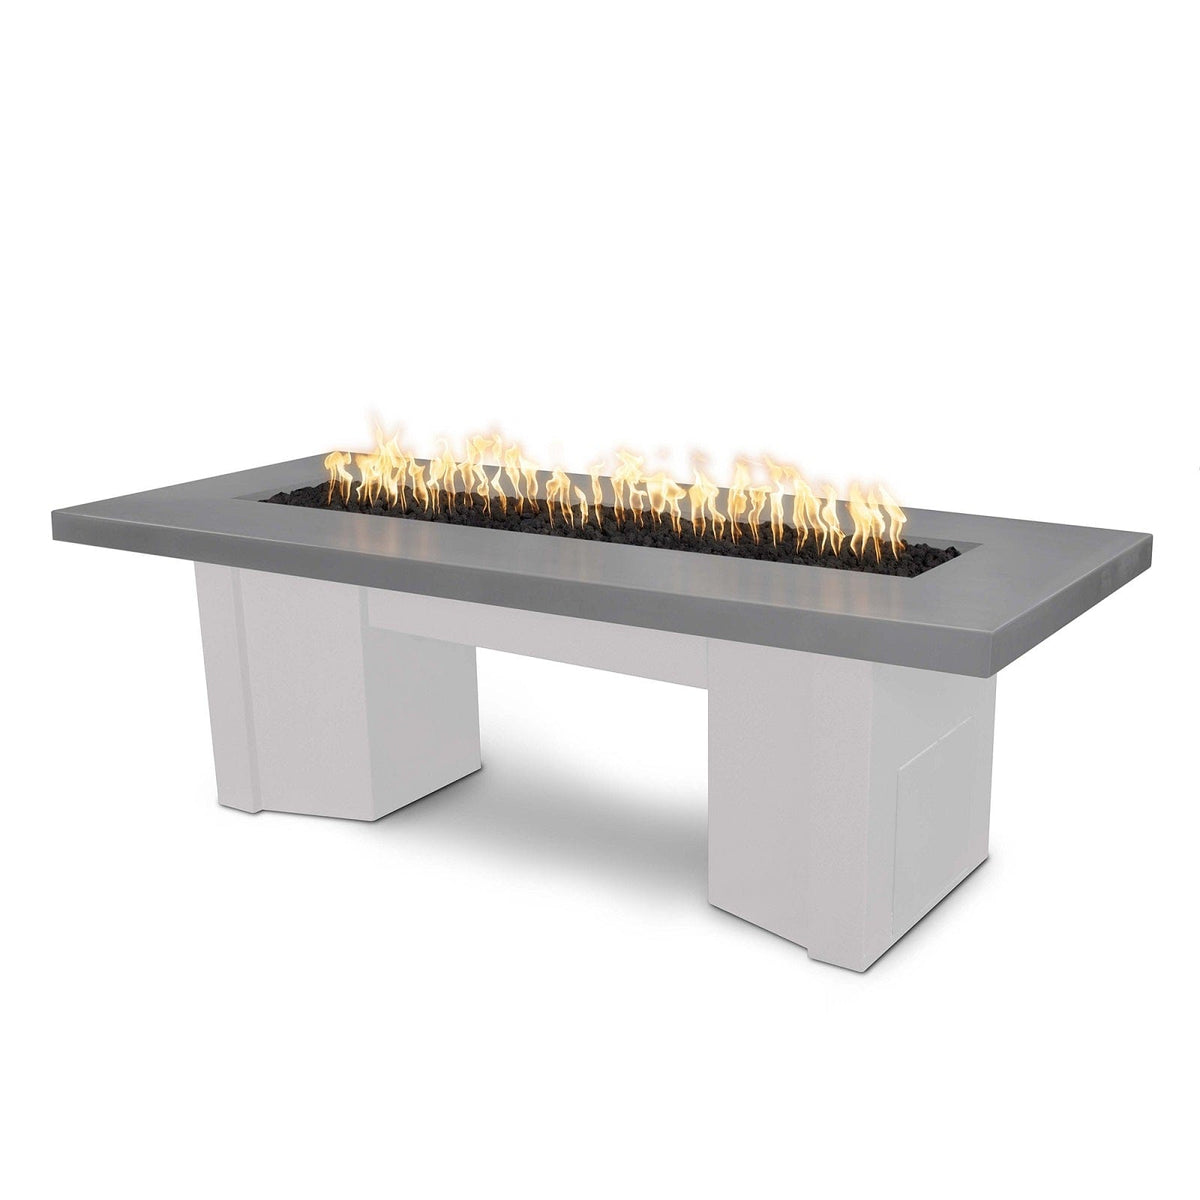 The Outdoor Plus Fire Features Natural Gray (-NGY) / White Powder Coated Steel (-WHT) The Outdoor Plus 78&quot; Alameda Fire Table Smooth Concrete in Liquid Propane - Match Lit with Flame Sense System / OPT-ALMGFRC78FSML-LP